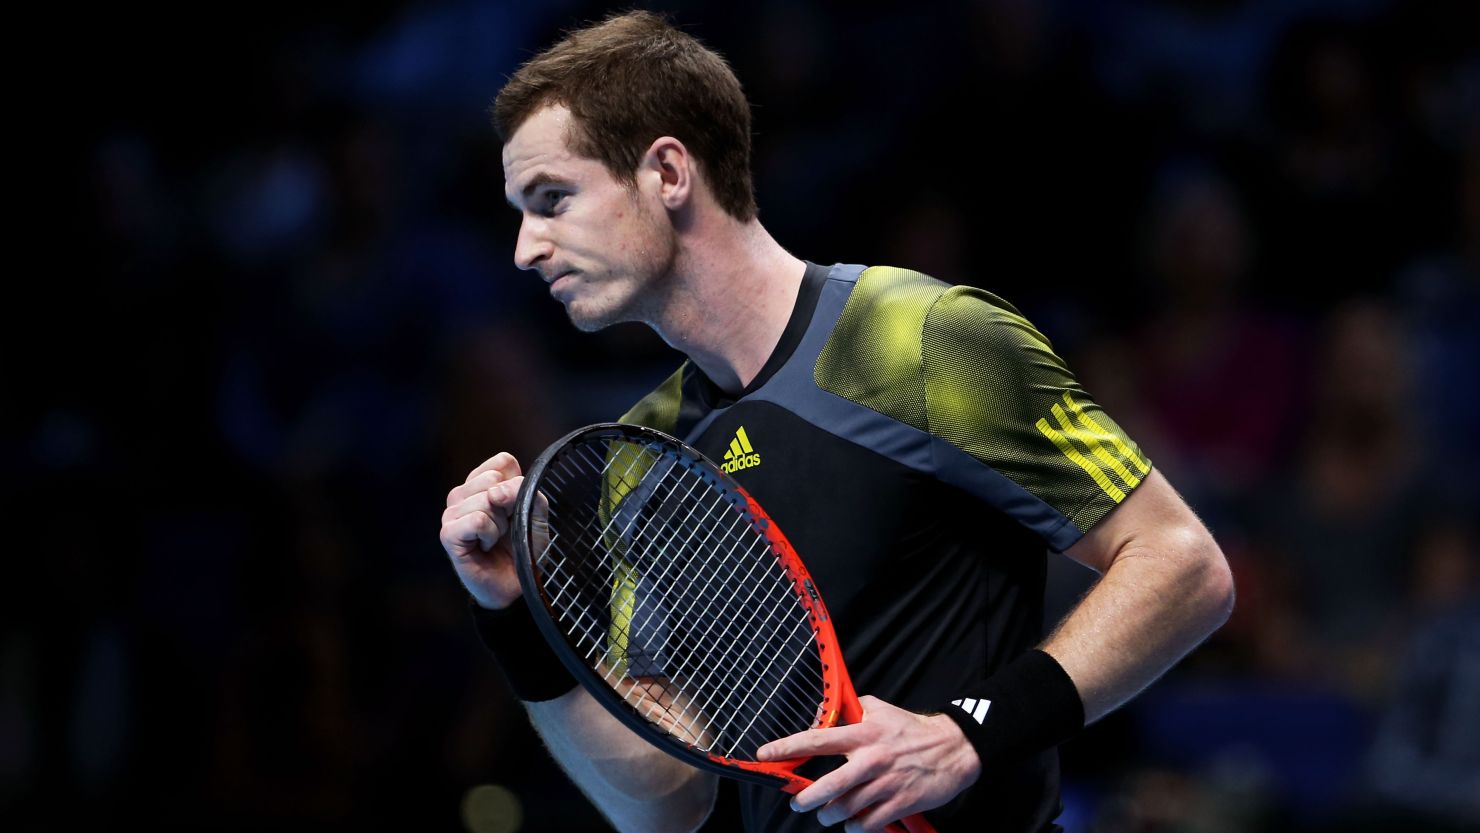 Andy Murray got off to a winning start at the ATP World Tour Finals, beating Tomas Berdych at the O2 Arena in London